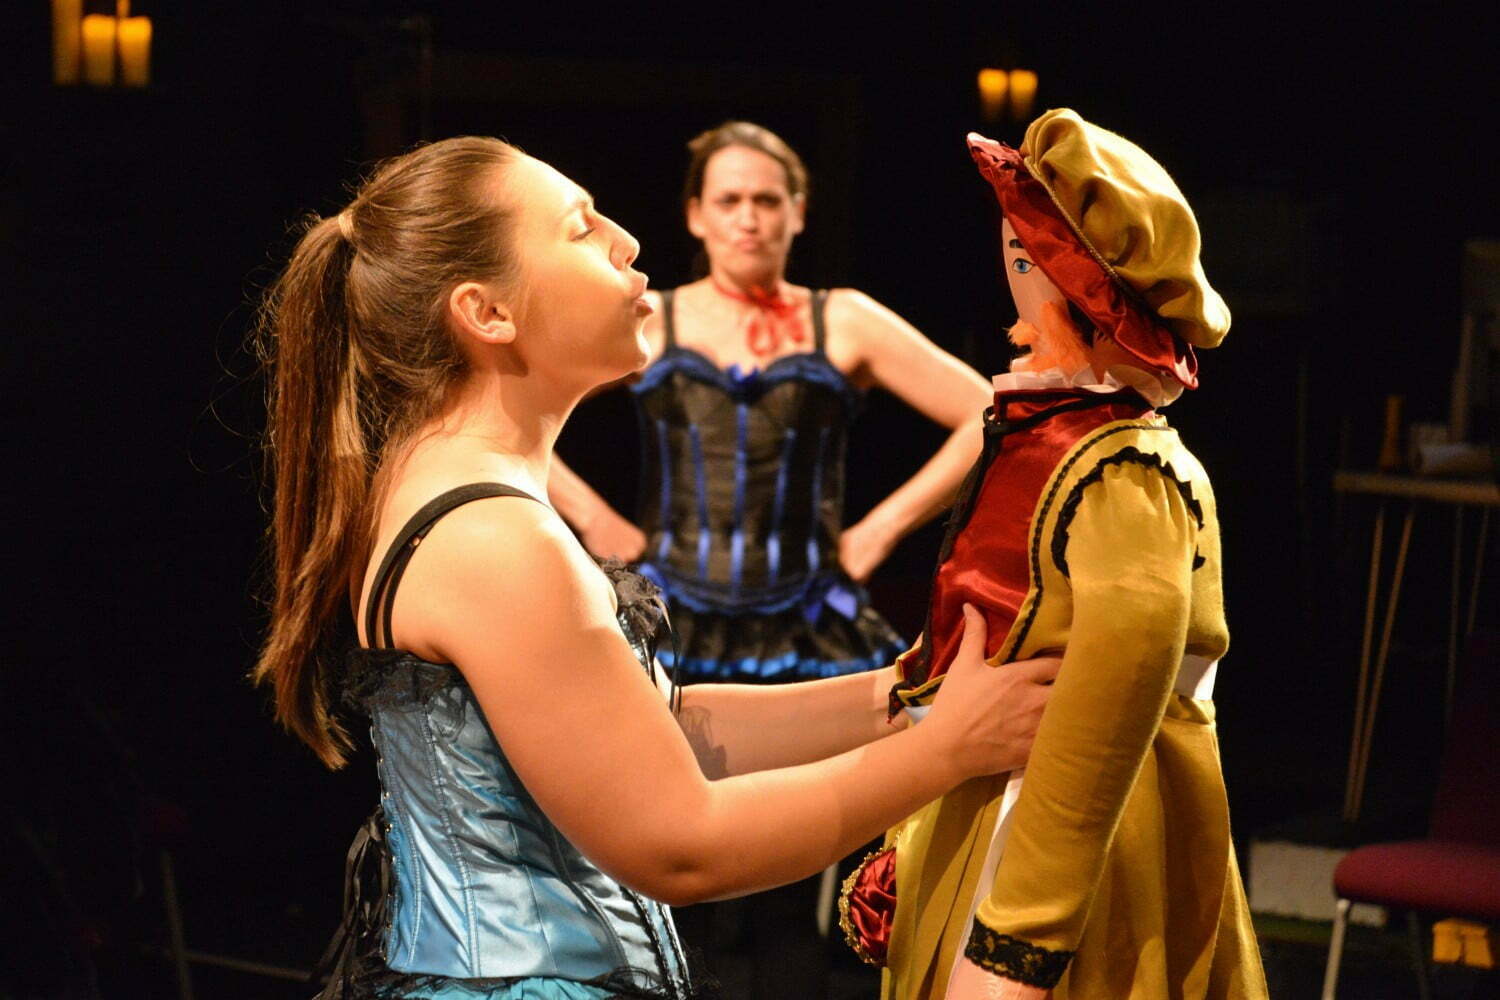 Six Dead Queens and an Inflatable Henry presented by The Company of Players (CoPs) Herford